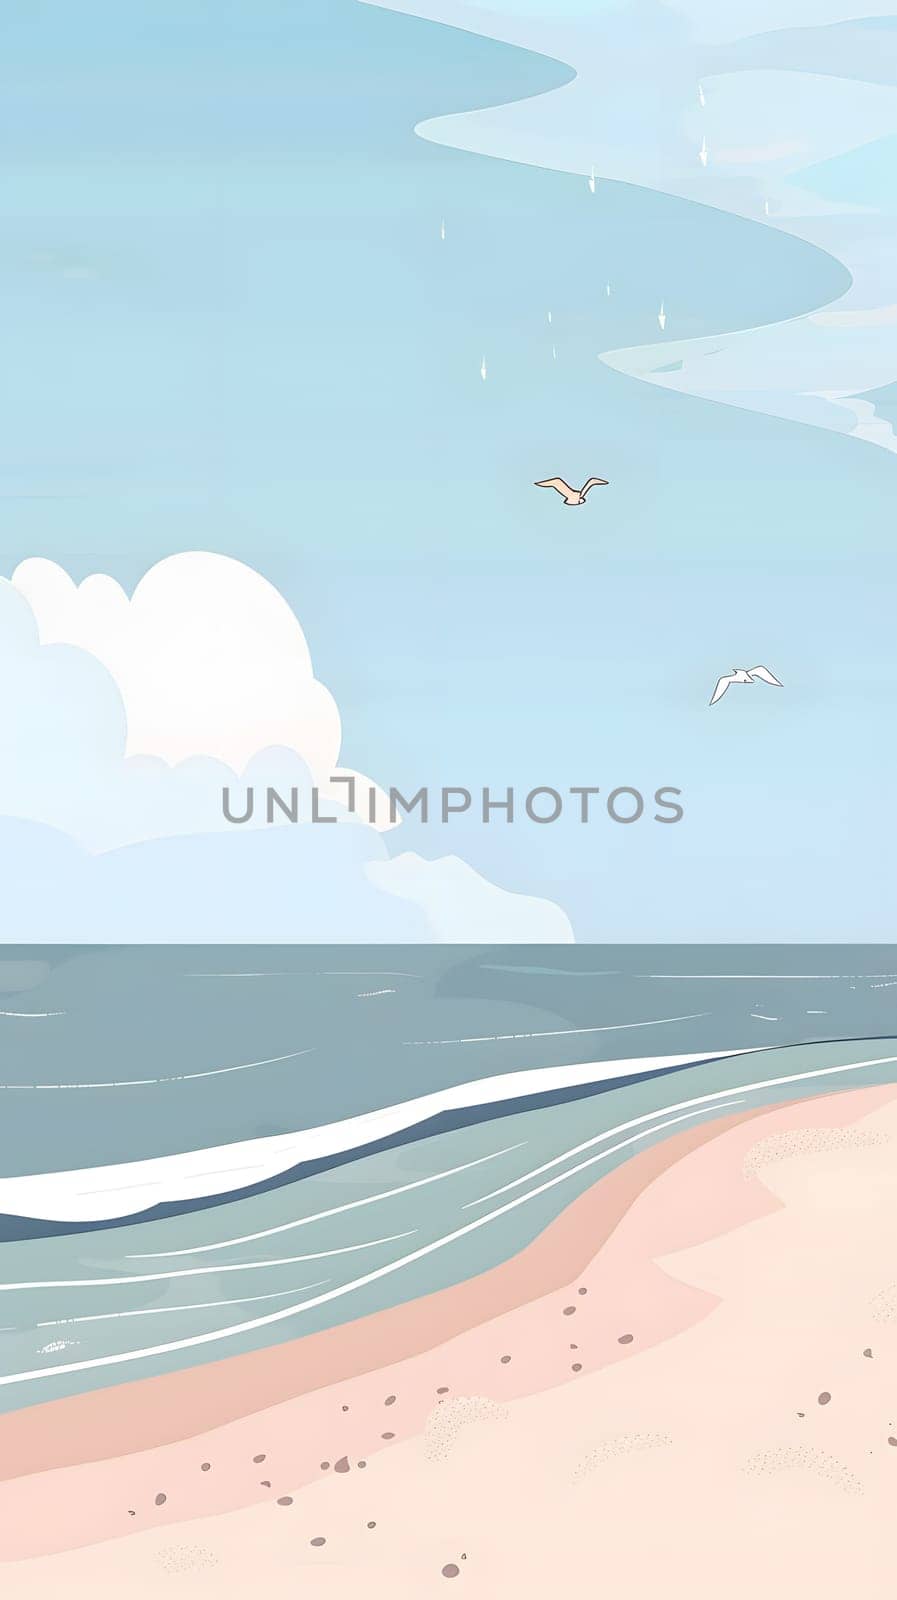 A serene beach landscape with calm waters, fluffy clouds in the sky, and birds soaring over the horizon. The perfect natural scene to relax and unwind